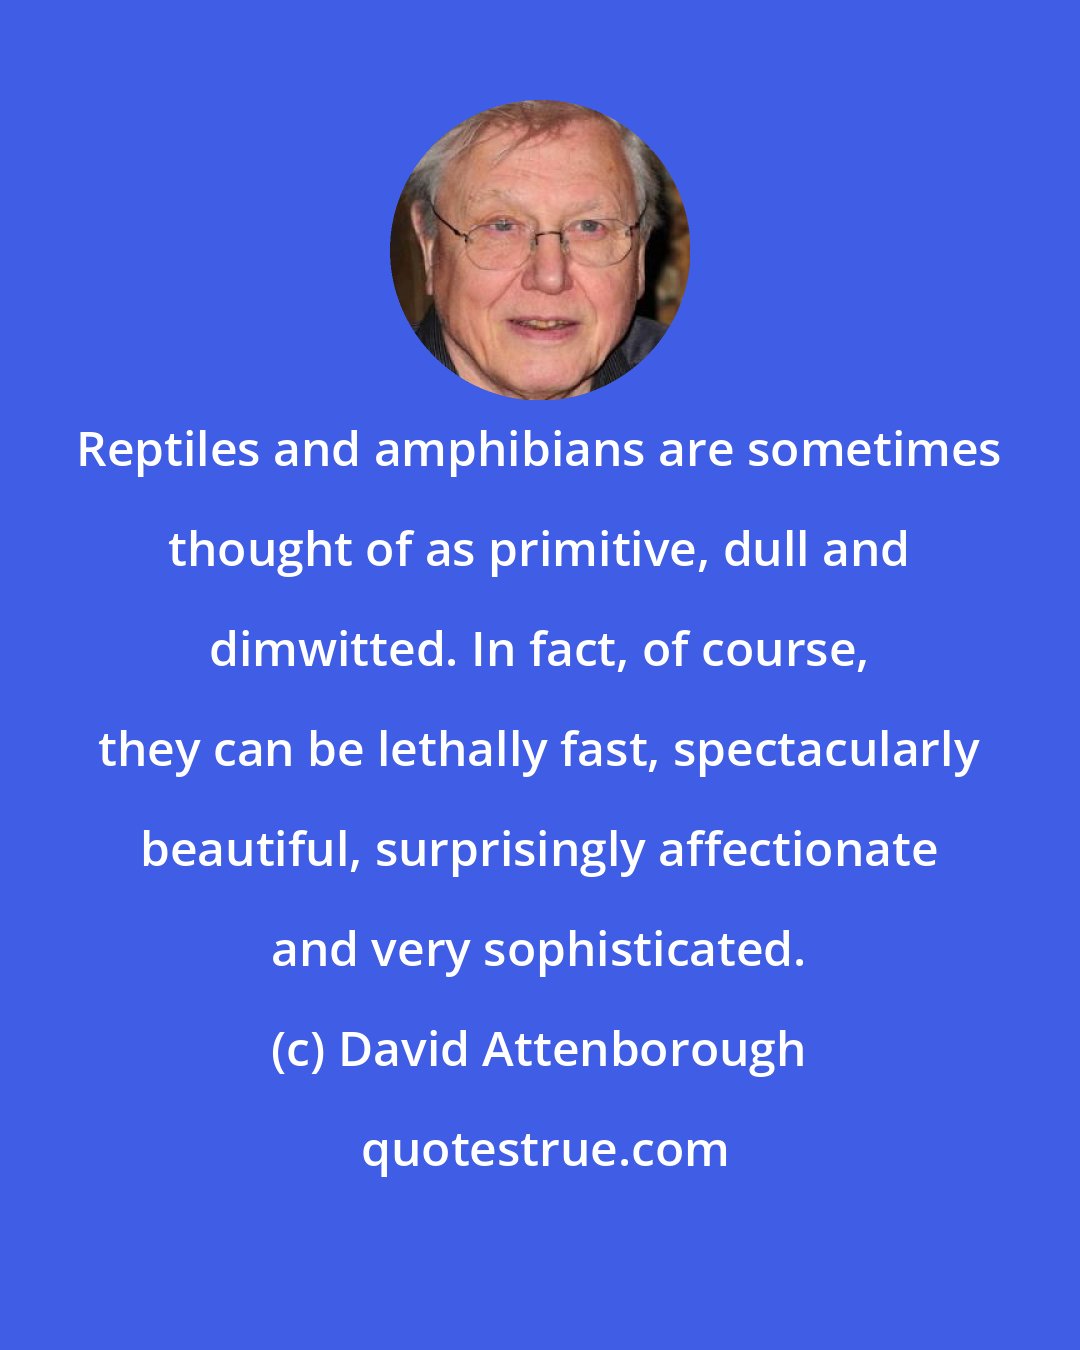 David Attenborough: Reptiles and amphibians are sometimes thought of as primitive, dull and dimwitted. In fact, of course, they can be lethally fast, spectacularly beautiful, surprisingly affectionate and very sophisticated.